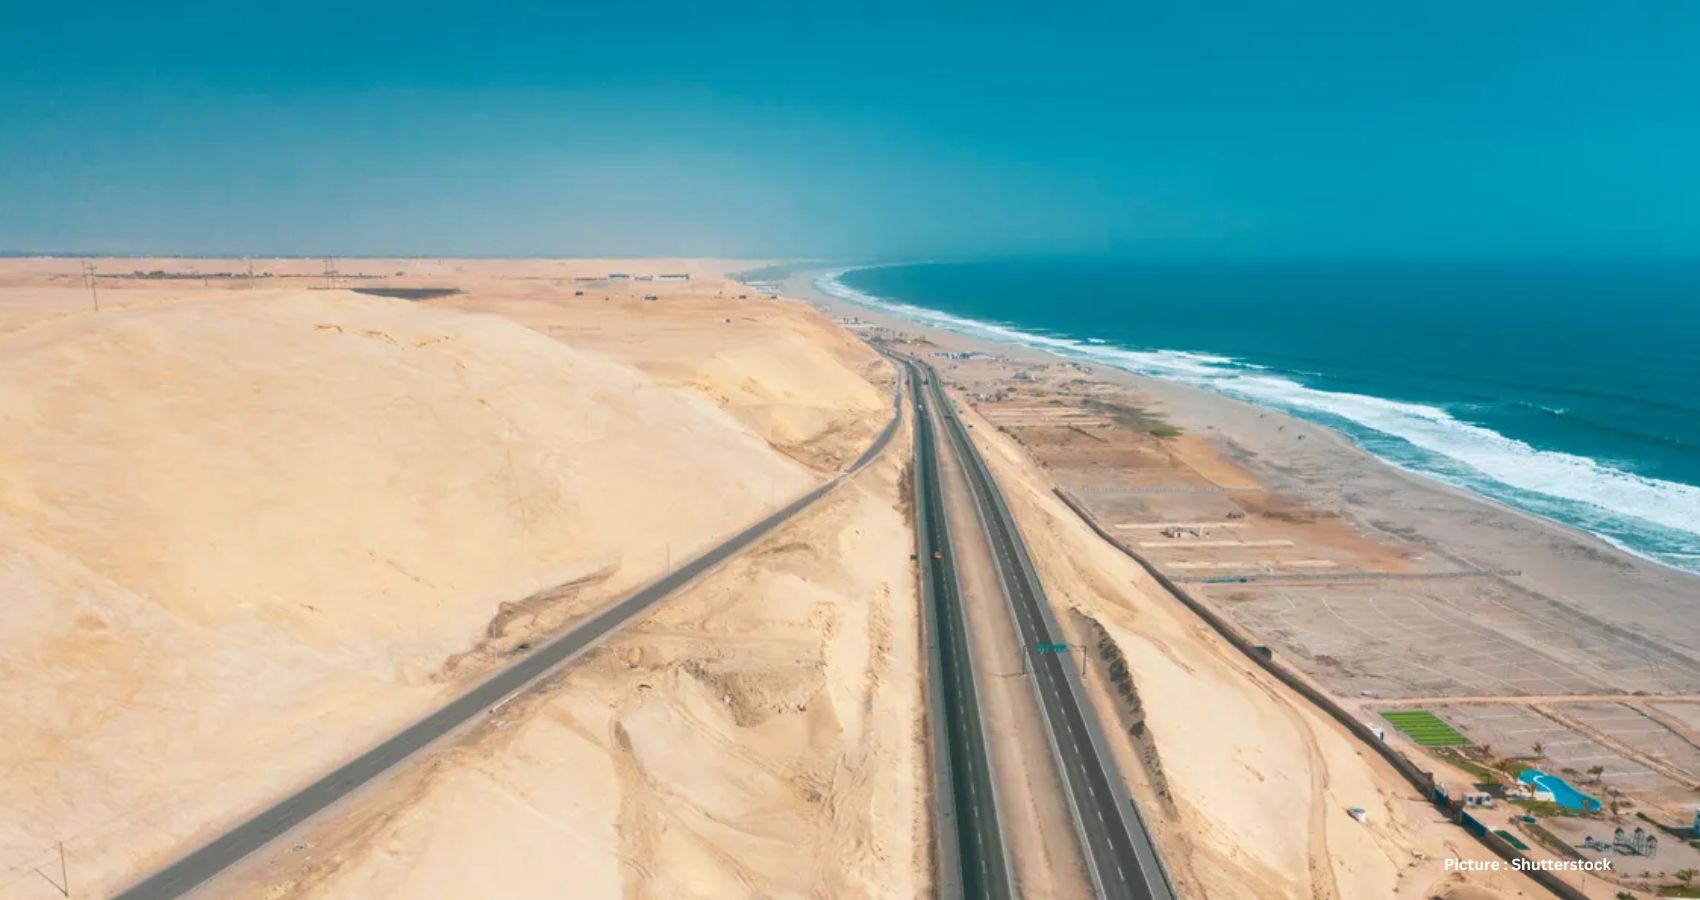 Debating Distances: Unraveling the Longest Roads in the World